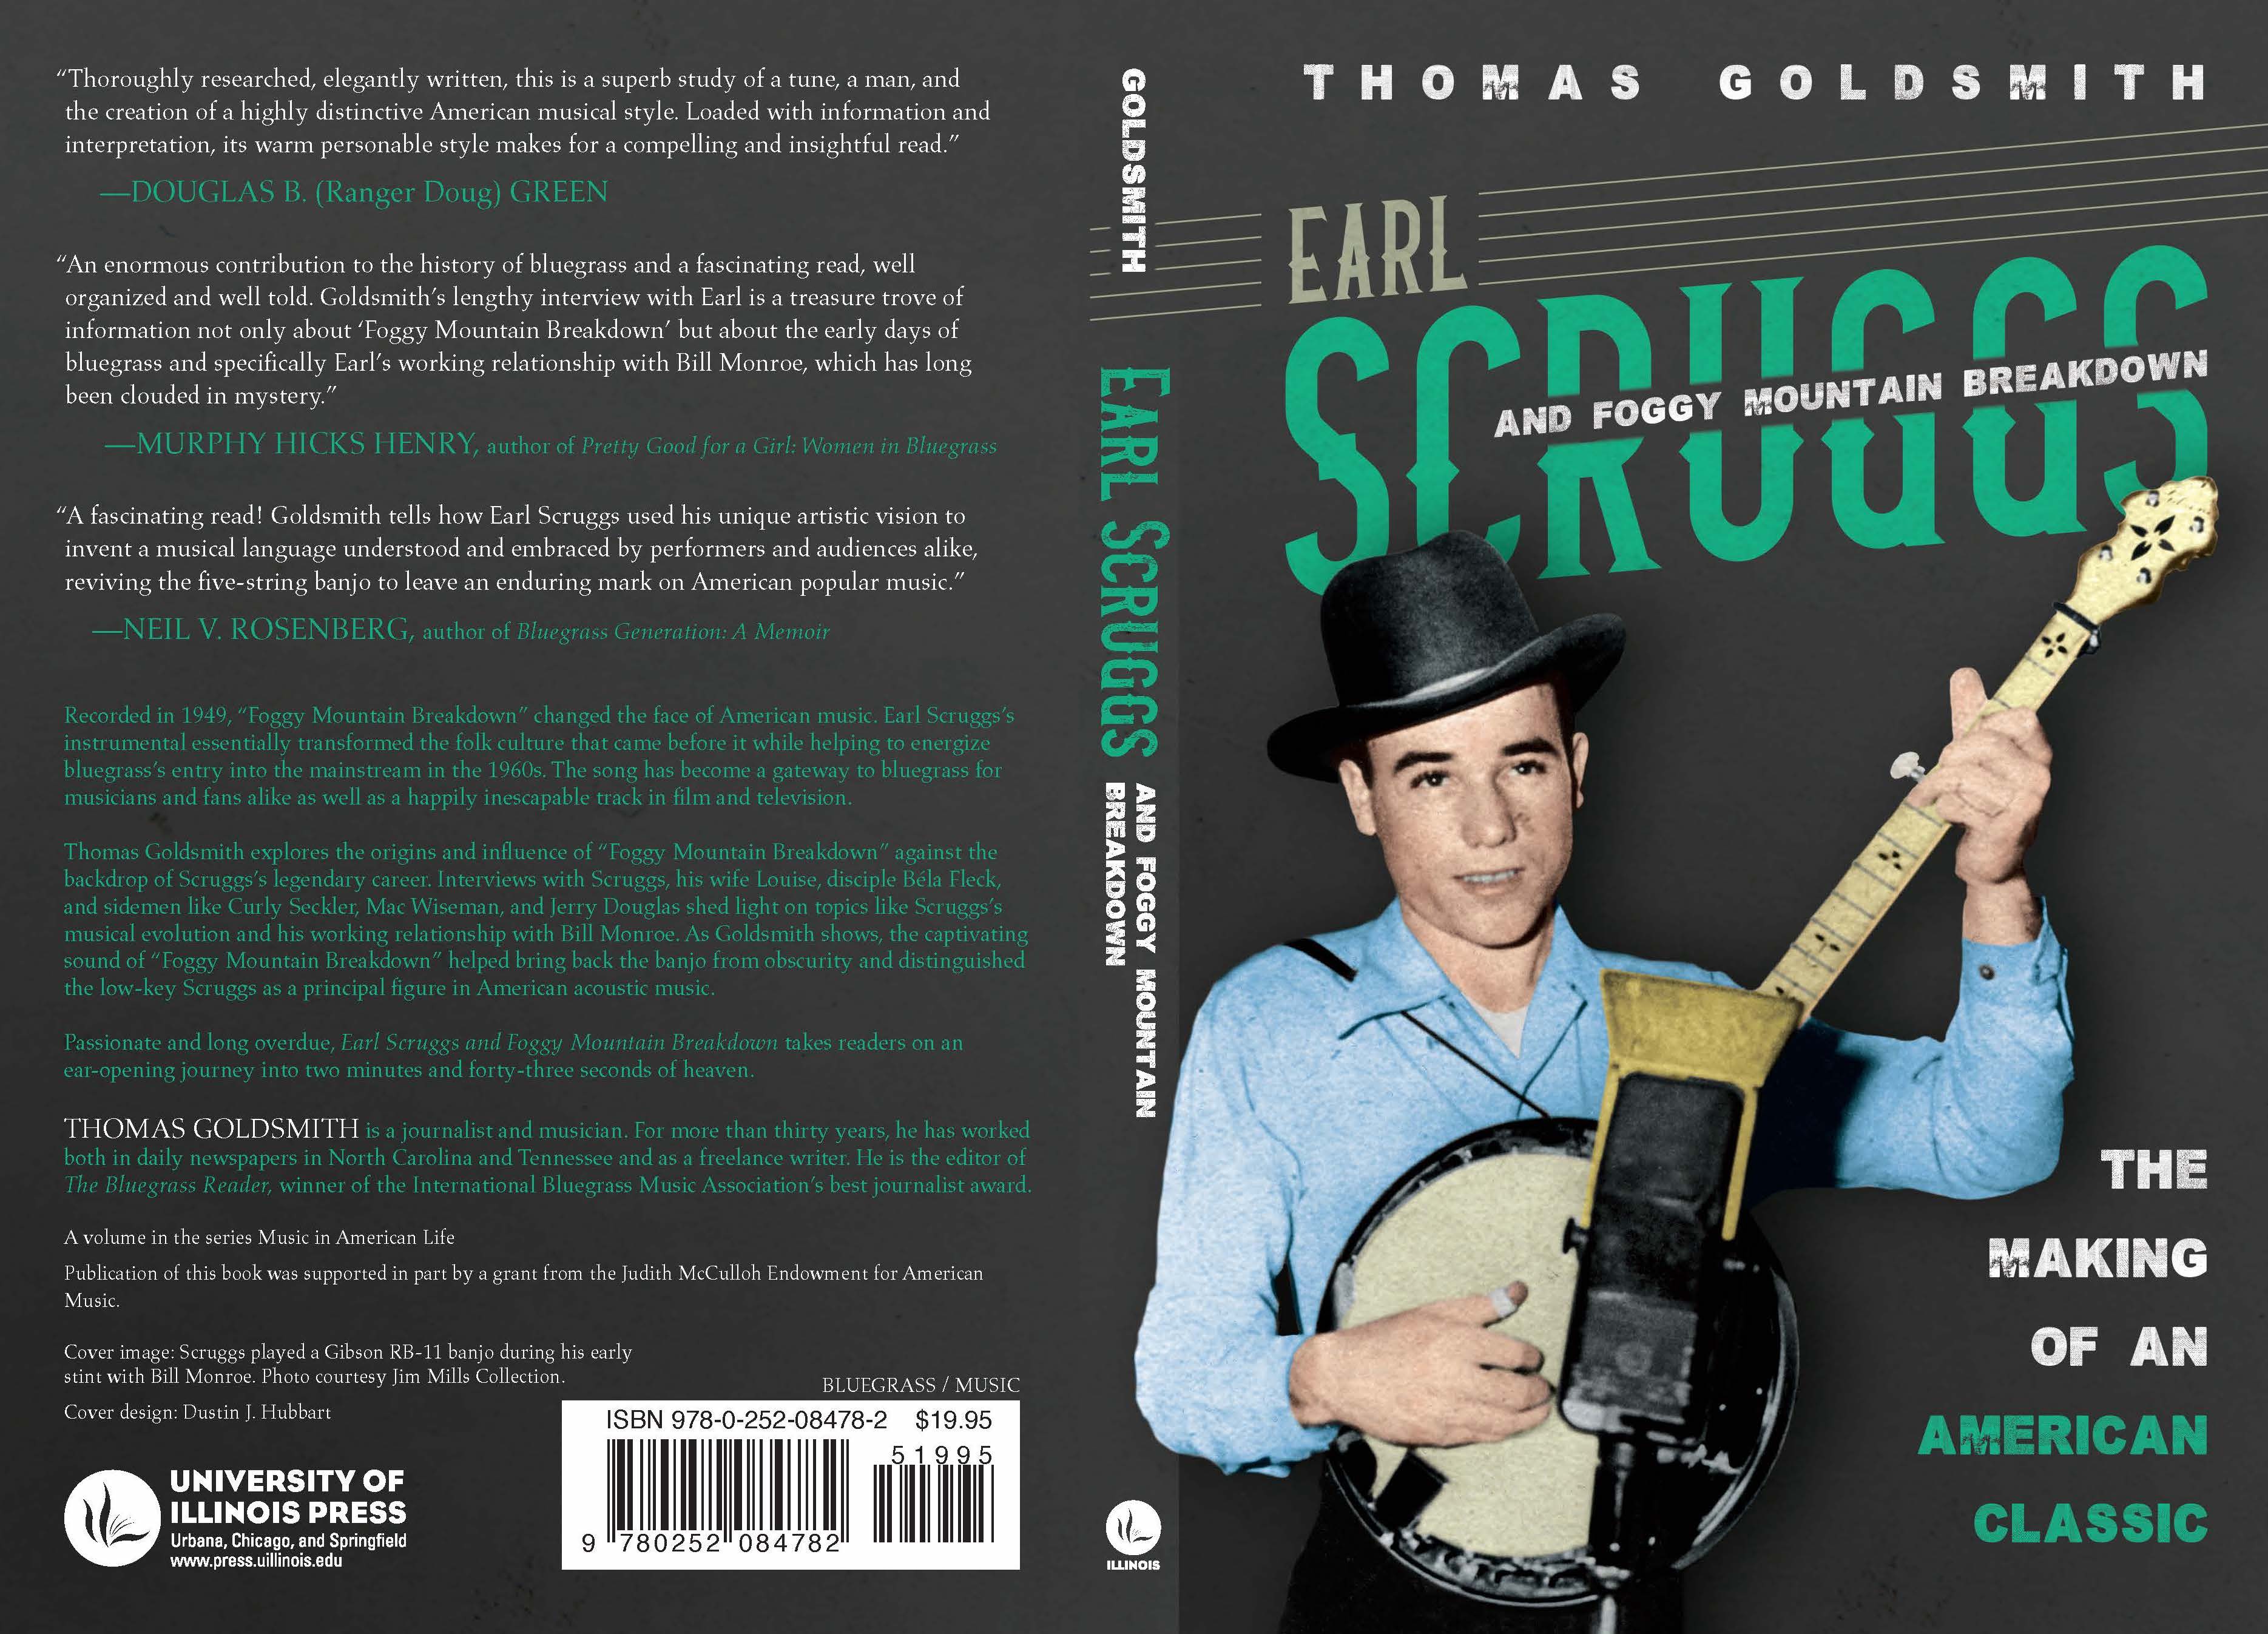 Earl Scruggs and Foggy Mountain Breakdown: The Making of an American Classic